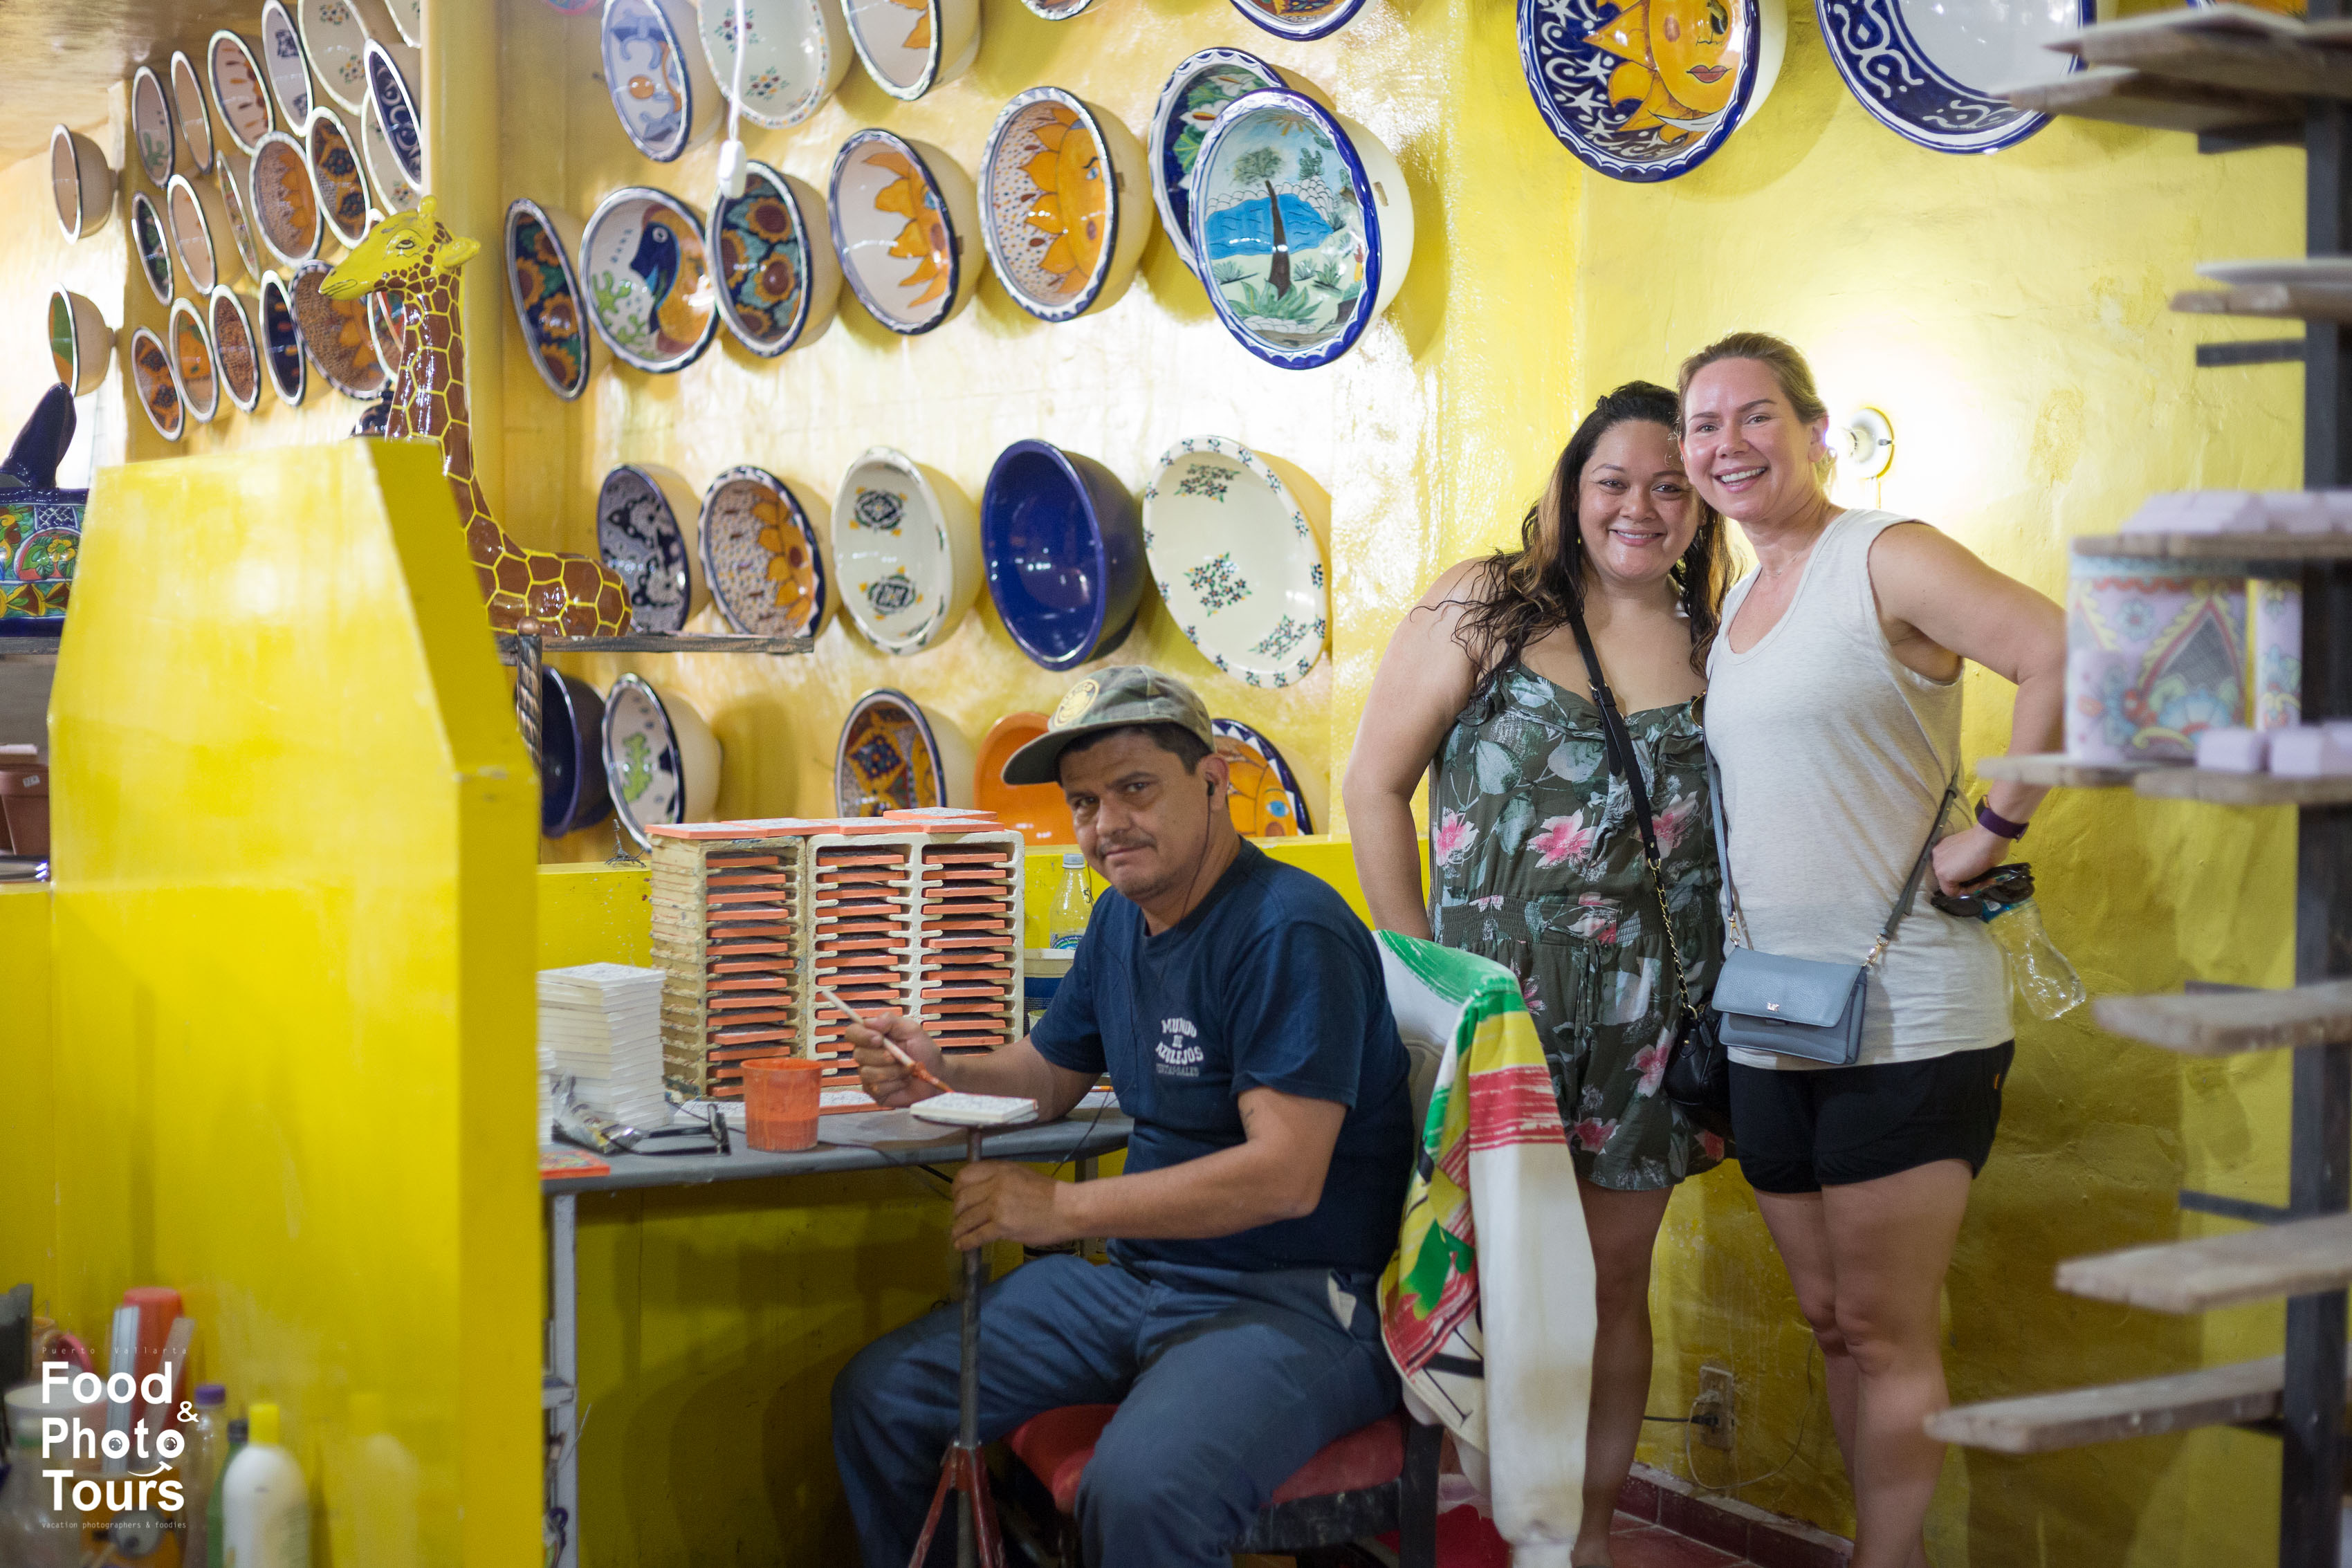 Best vacation photographers and food tours by Locals in Puerto Vallarta